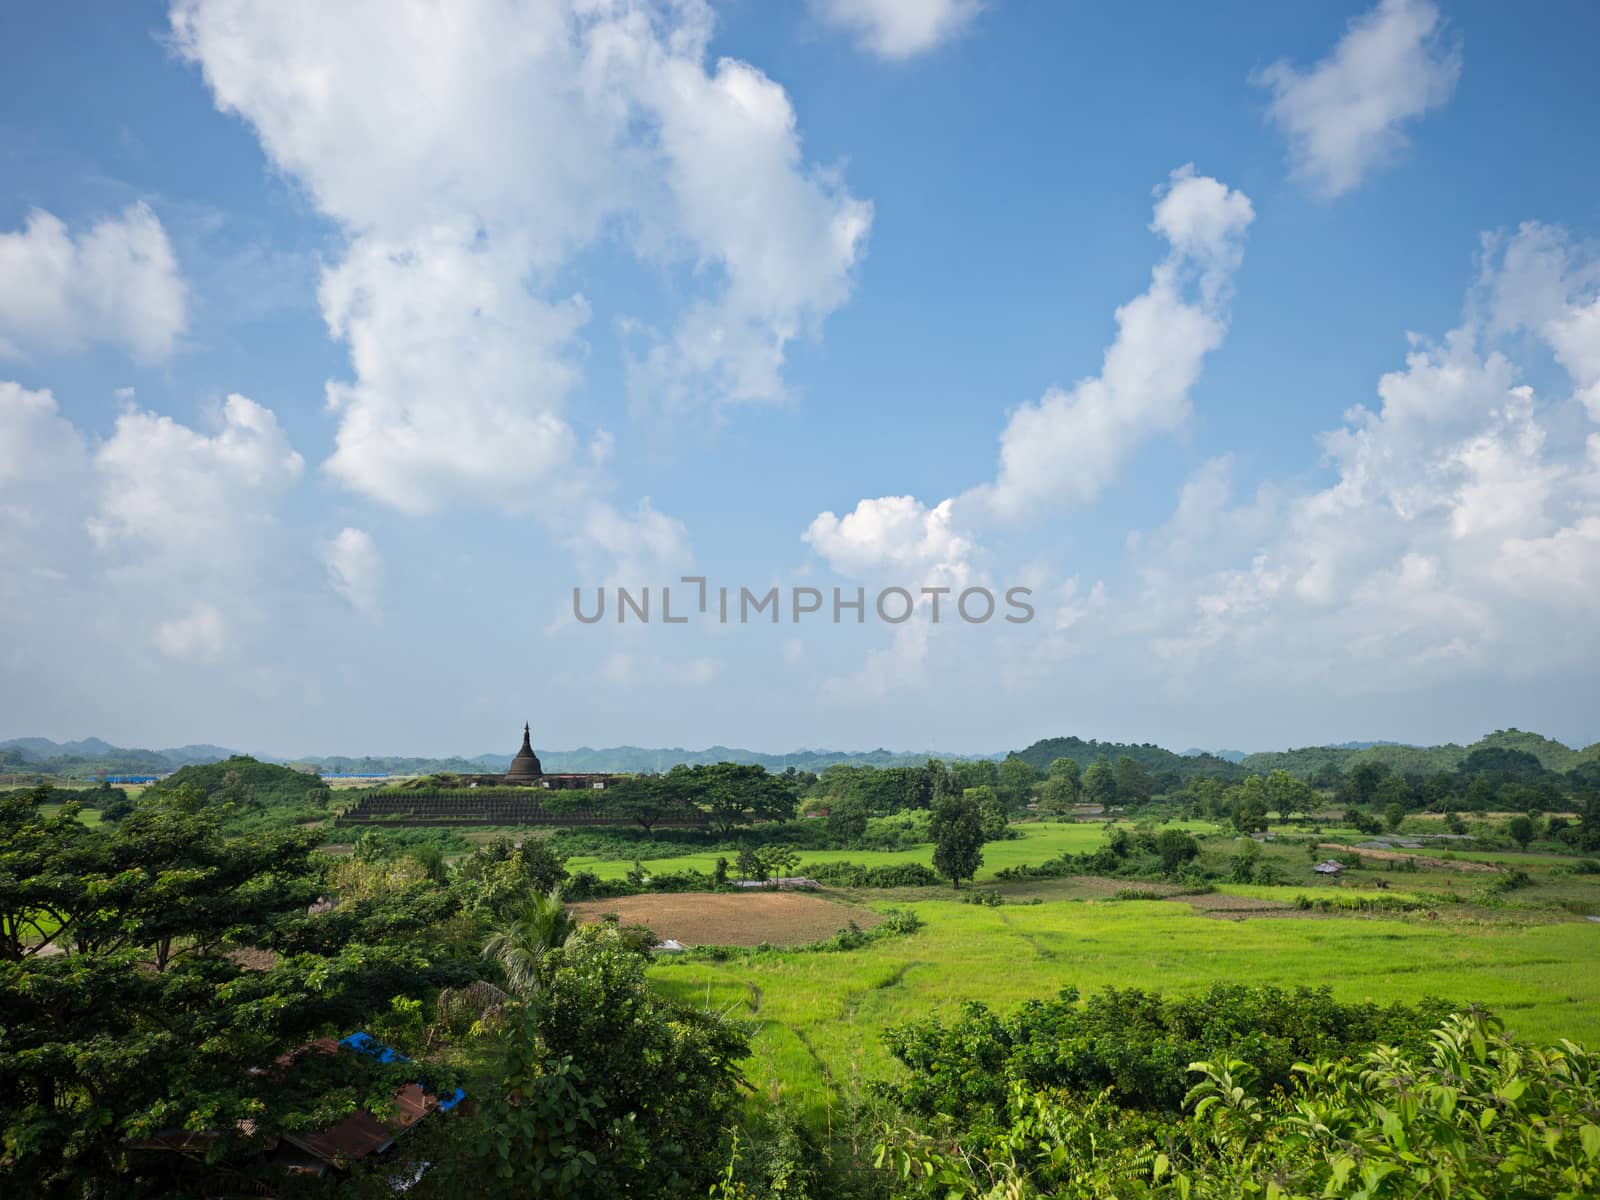 Landscape with the Koe-thaung Temple in the background, the temple of the 90,000 Buddhas, built by King Min Dikkha during the years 1554-1556 in Mrauk U, Rakhine State in Myanmar.